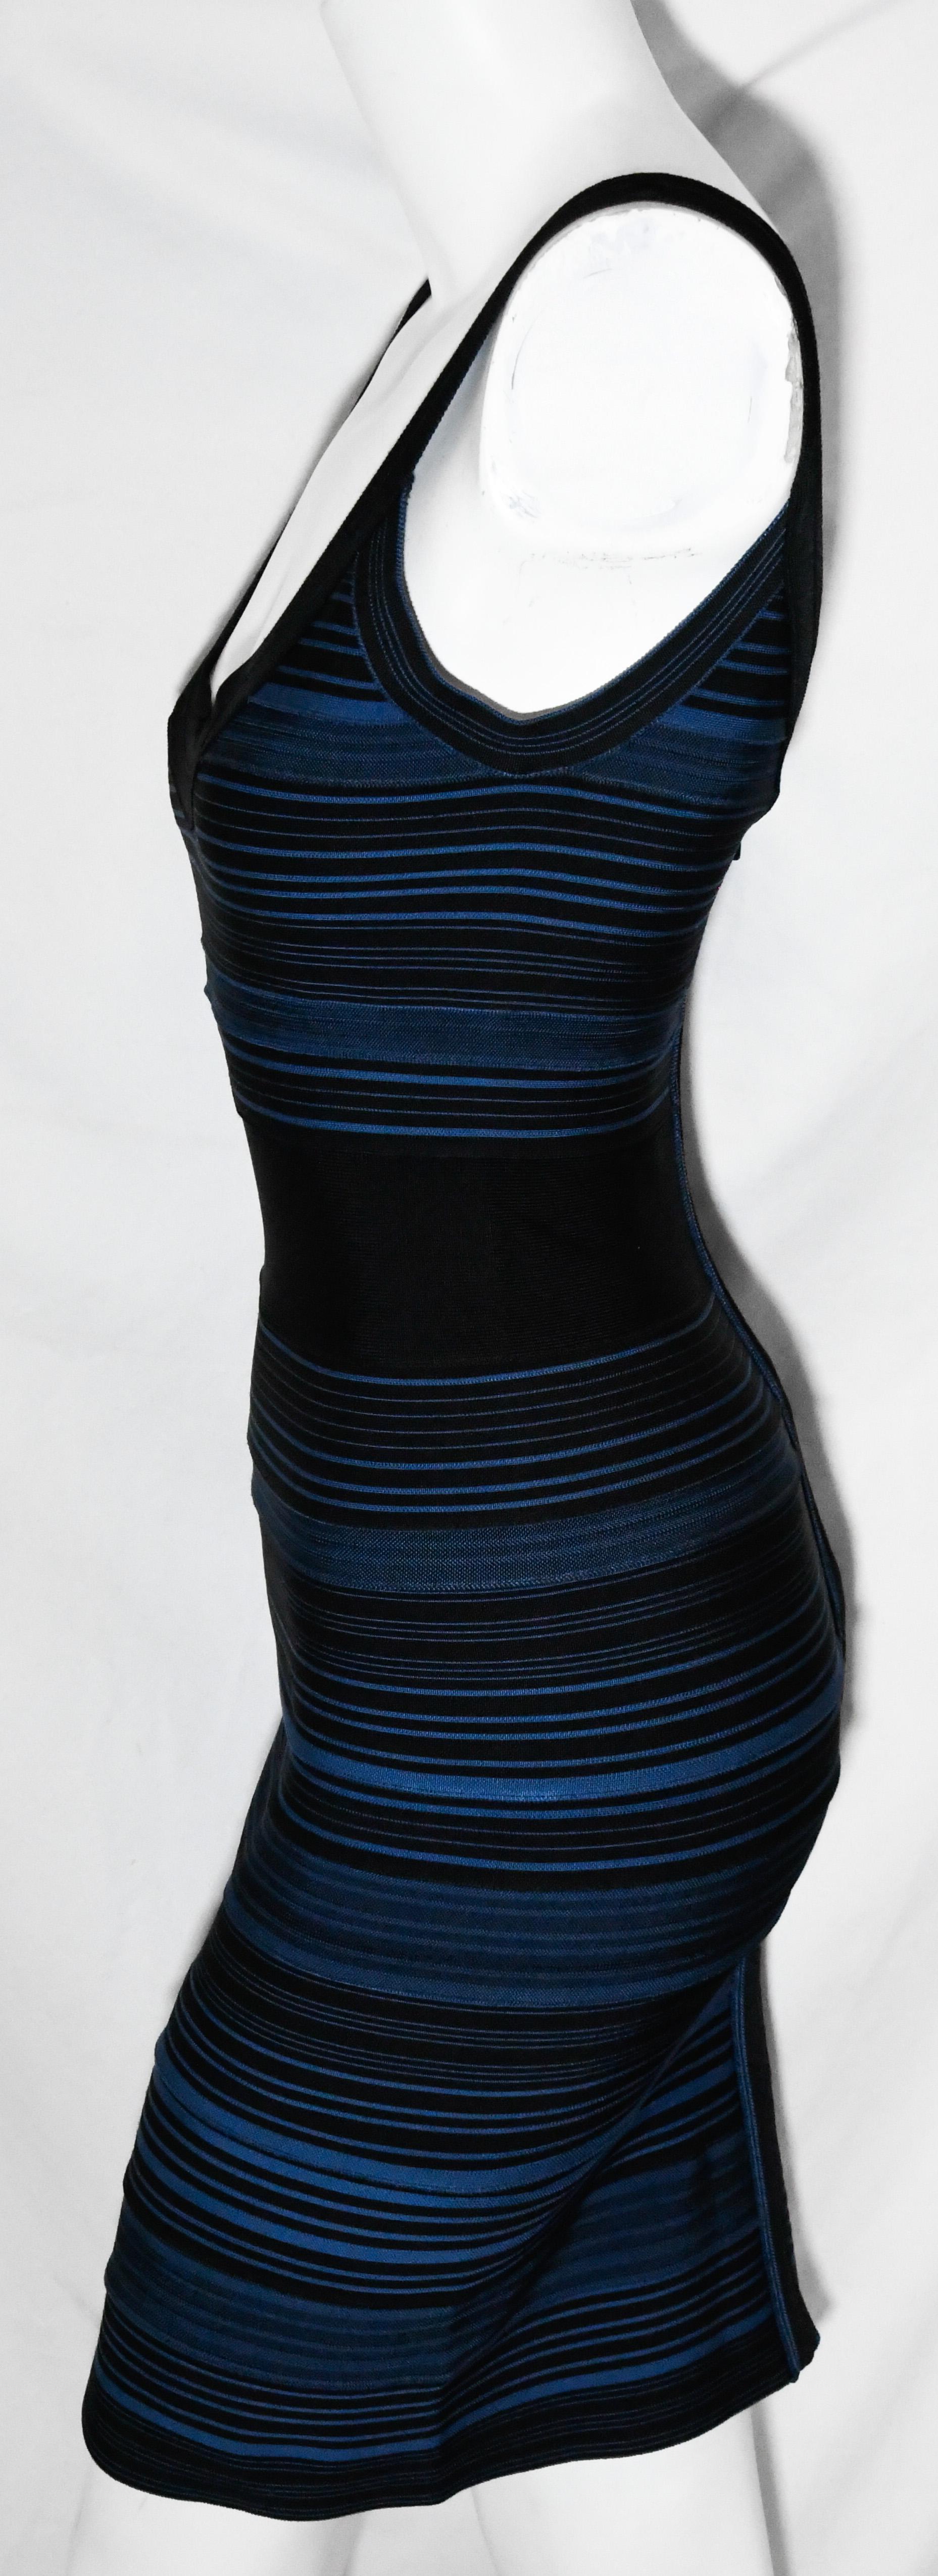 Herve Leger black and blue bandage striped dress includes low cut scoop neck and cinched band waist.  This dress has an exposed back zipper, for closure.  The dress is unlined.   Dress is in excellent condition.  